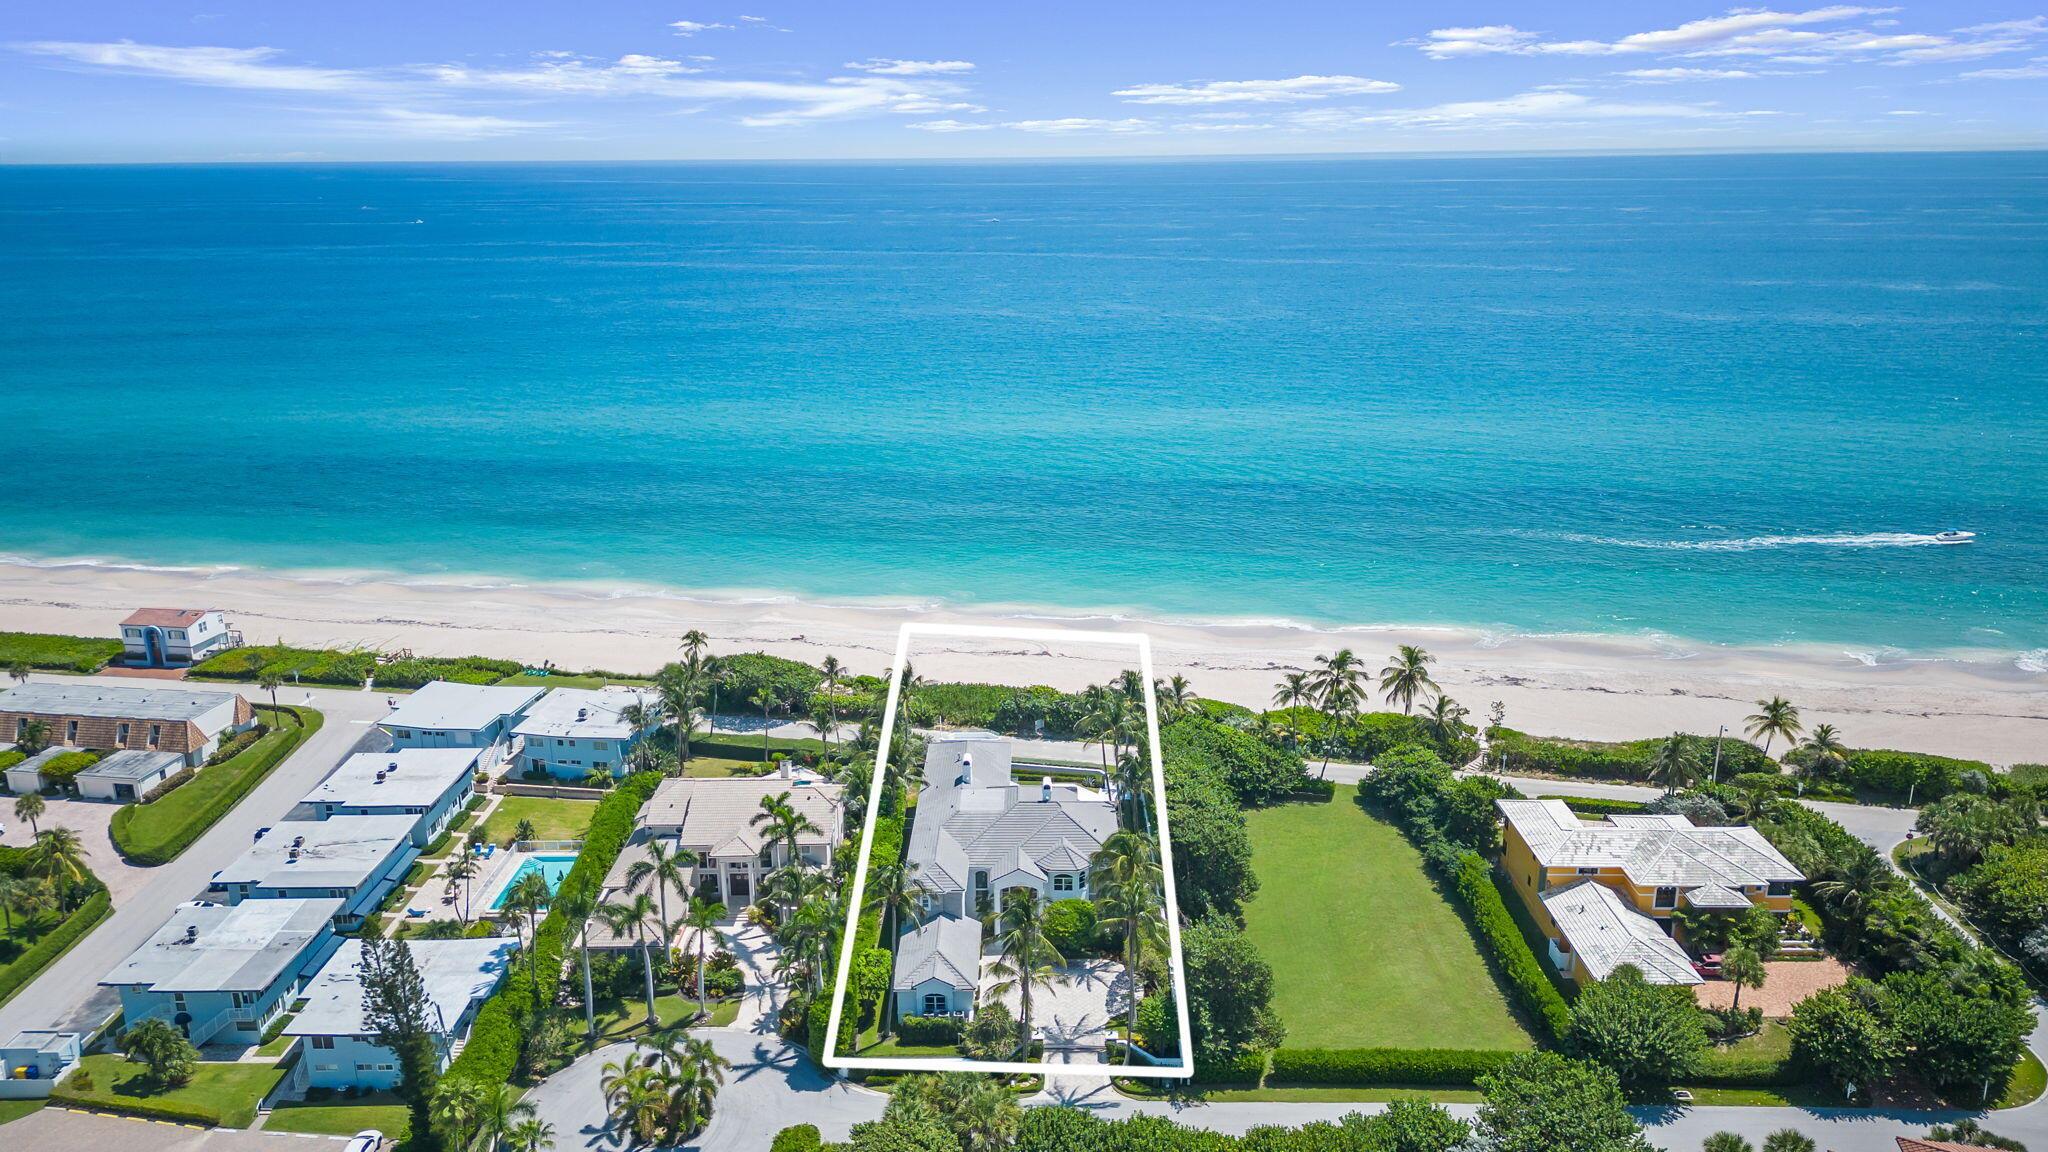 Completely renovated in 2023 with additional extensive improvements in 2024. Turnkey, like-new, fully furnished oceanfront estate sited on a 3/4 acre lot featuring a spectacular private 100' x 124' ft direct oceanfront parcel. Offering 6 bedrooms, 5.1 bathrooms and 10,000+ total square feet, 5 Beachway N., is replete with views of the ocean from nearly every room, private beach deck with fire pit, outdoor kitchen and heat pool, high ceilings throughout, two main floor suites, controlled wine storage, multiple gas fireplaces, safe room, in-law suite with kitchenette, elevator, 3 car garage and workshop area. Situated on a quiet cul-de-sac with gated private driveway, 10 minutes to Delray Beach and Atlantic Ave, 20 minutes to PBI and Worth Ave, offering many options for shopping and dining.